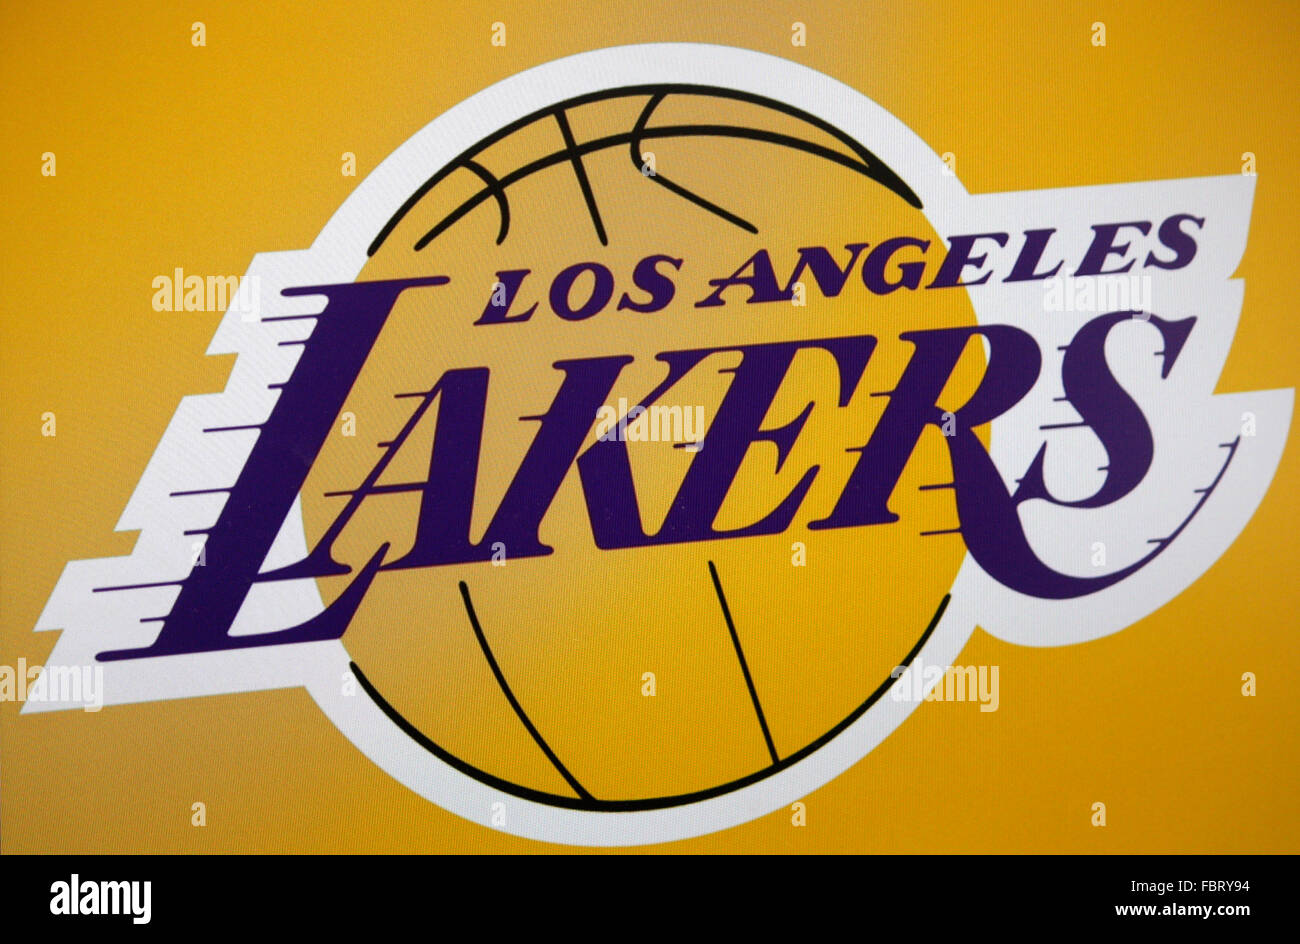 Markenname: 'Los Angeles Lakers', Berlin. Stock Photo